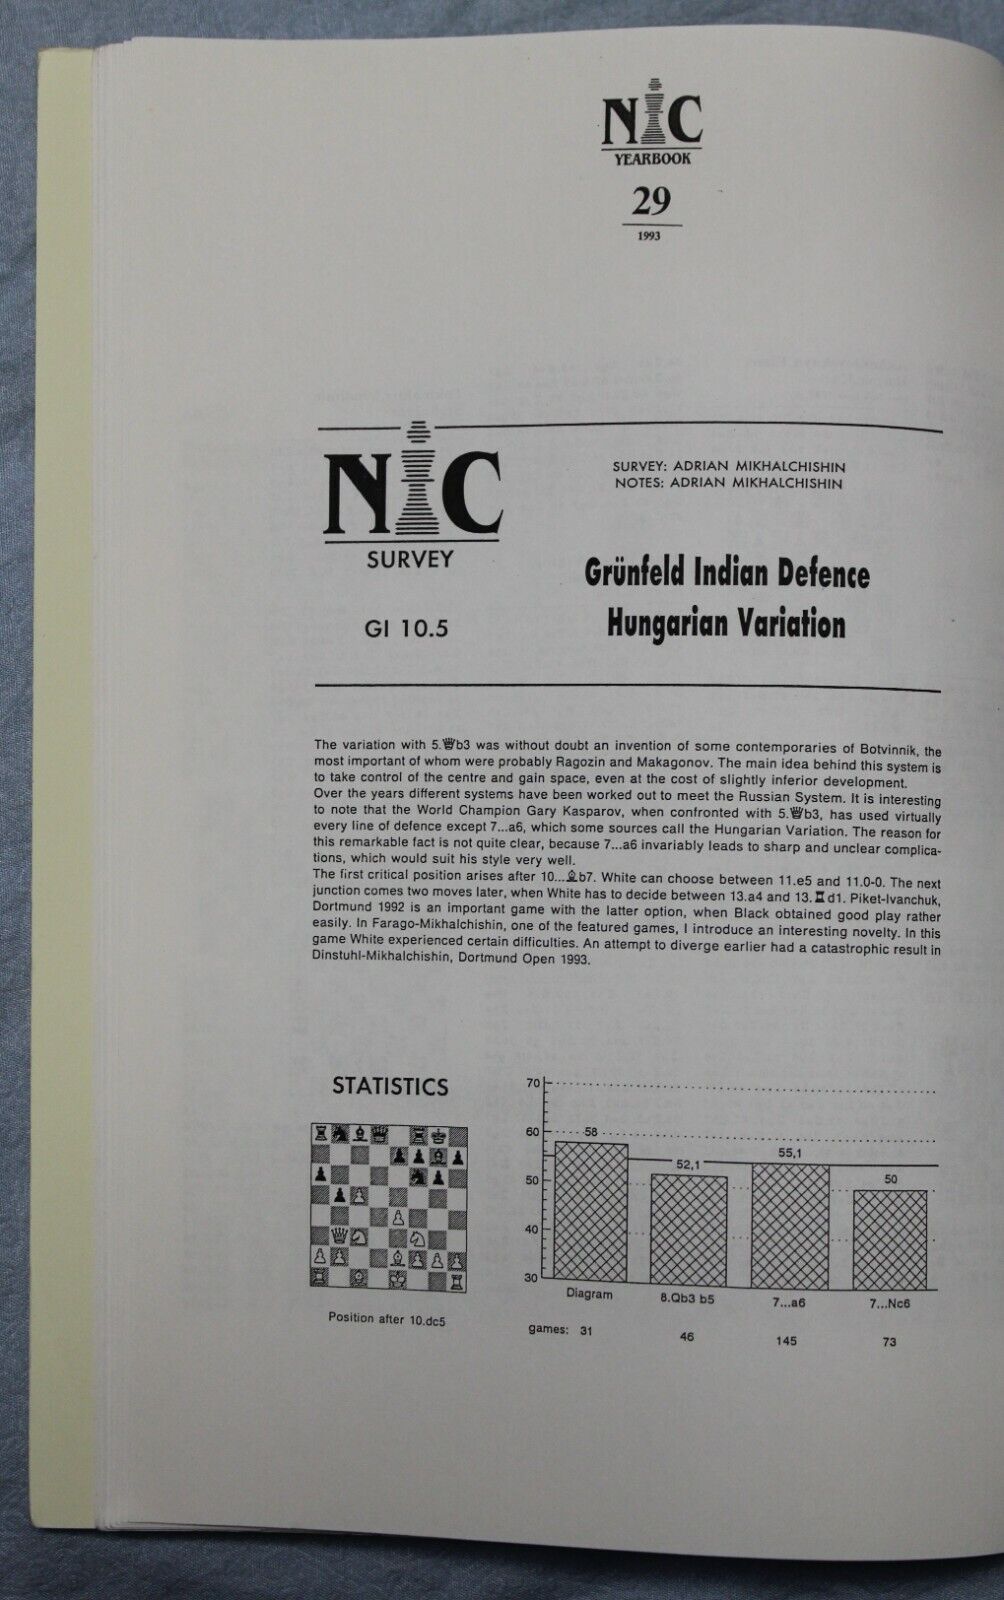 11074.Chess Book: Grunfeld Defence, Annotated games, Chess Informant&NIC Yearbook, 199